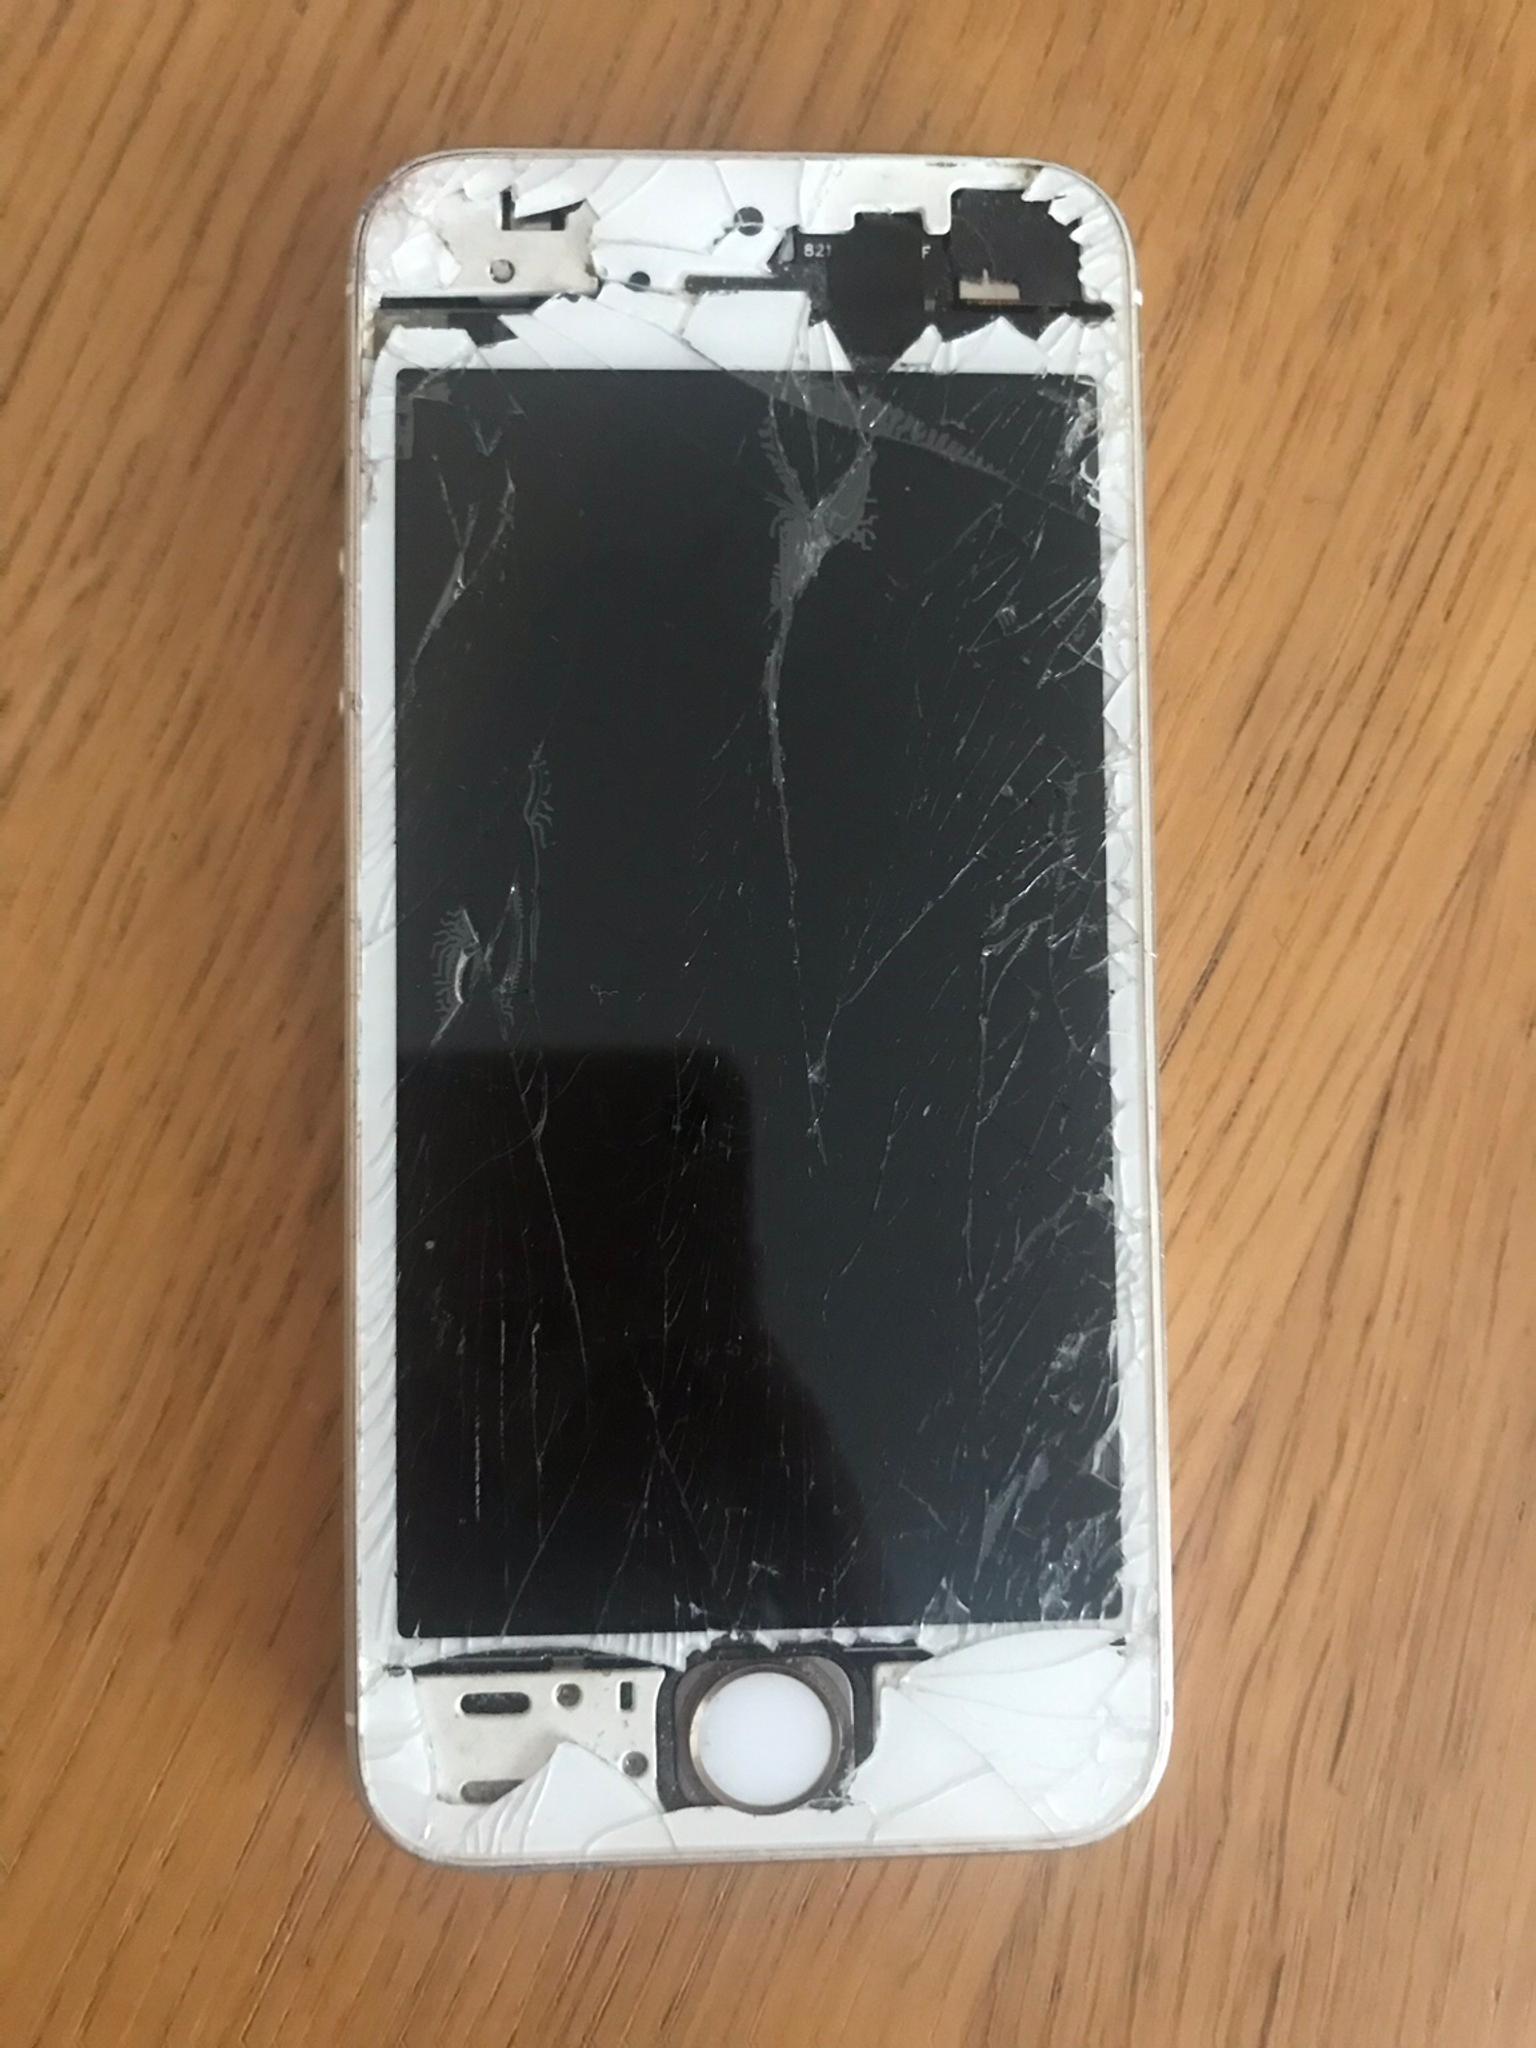 *BROKEN* iPhone 5s in M22 Manchester for £5.00 for sale ...